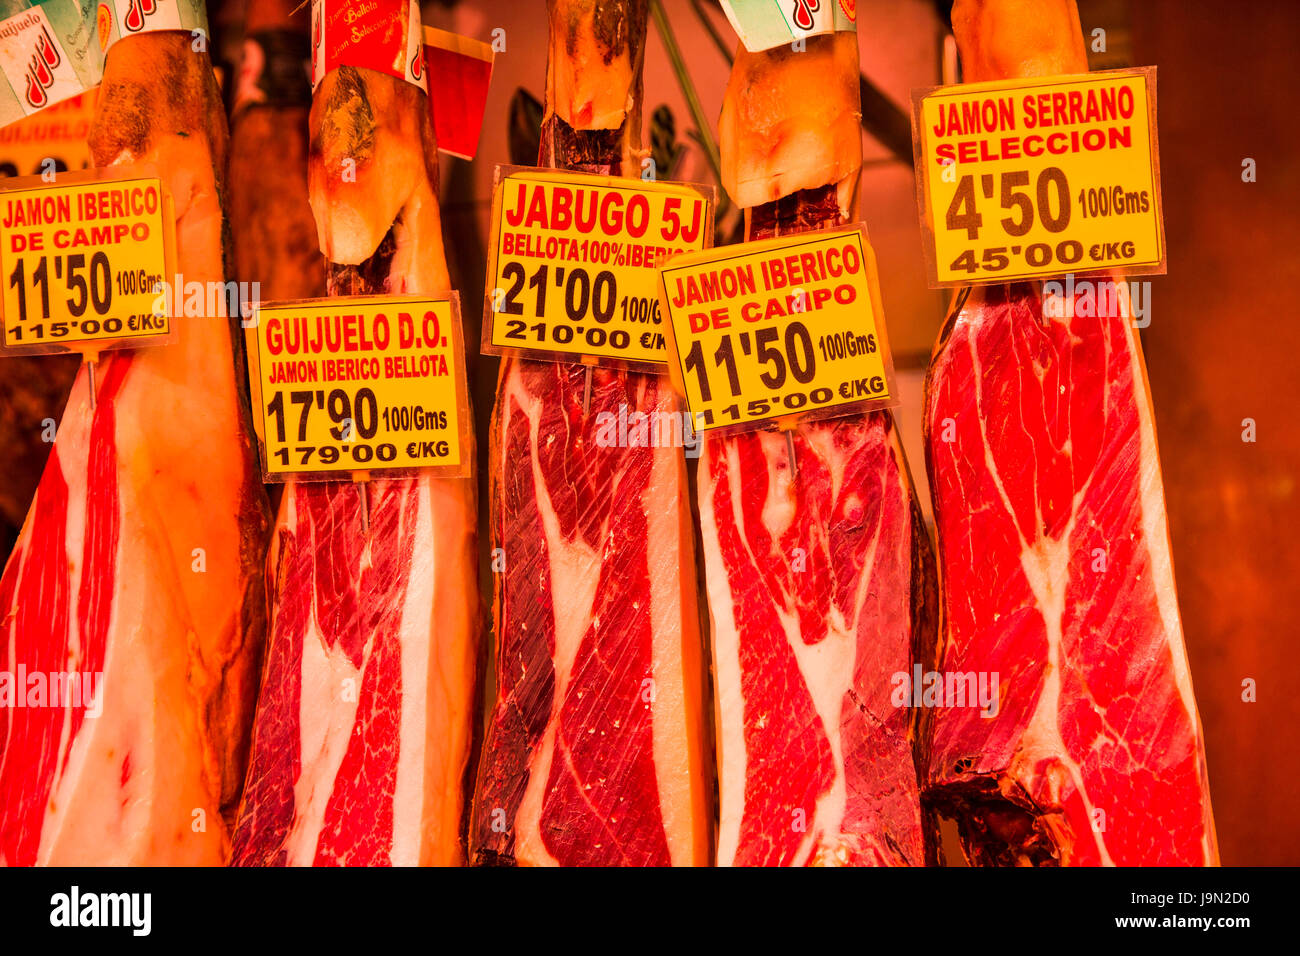 Barcelona's cavernous La Boqueria market is famous for its Jamon Iberico, arguably the world's best tasting ham, named after a black Iberian pig. Stock Photo